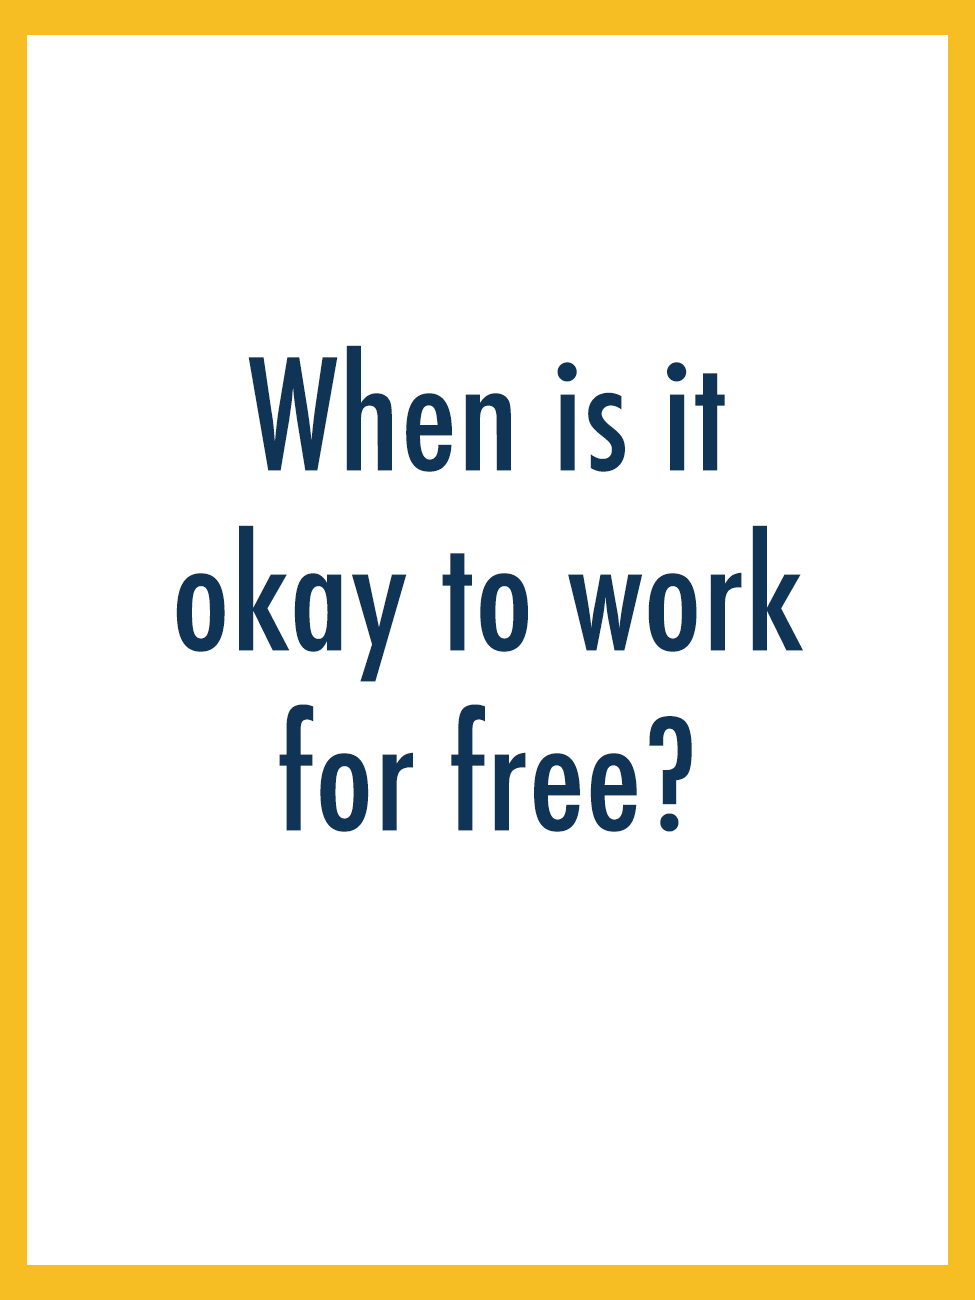 A flashing GIF thats shows the words 'When is it okay to work for free?' then flashes to a black and white illustration of a £10 note. The GIF introduces the Alex Holder article about the problems of working for free.